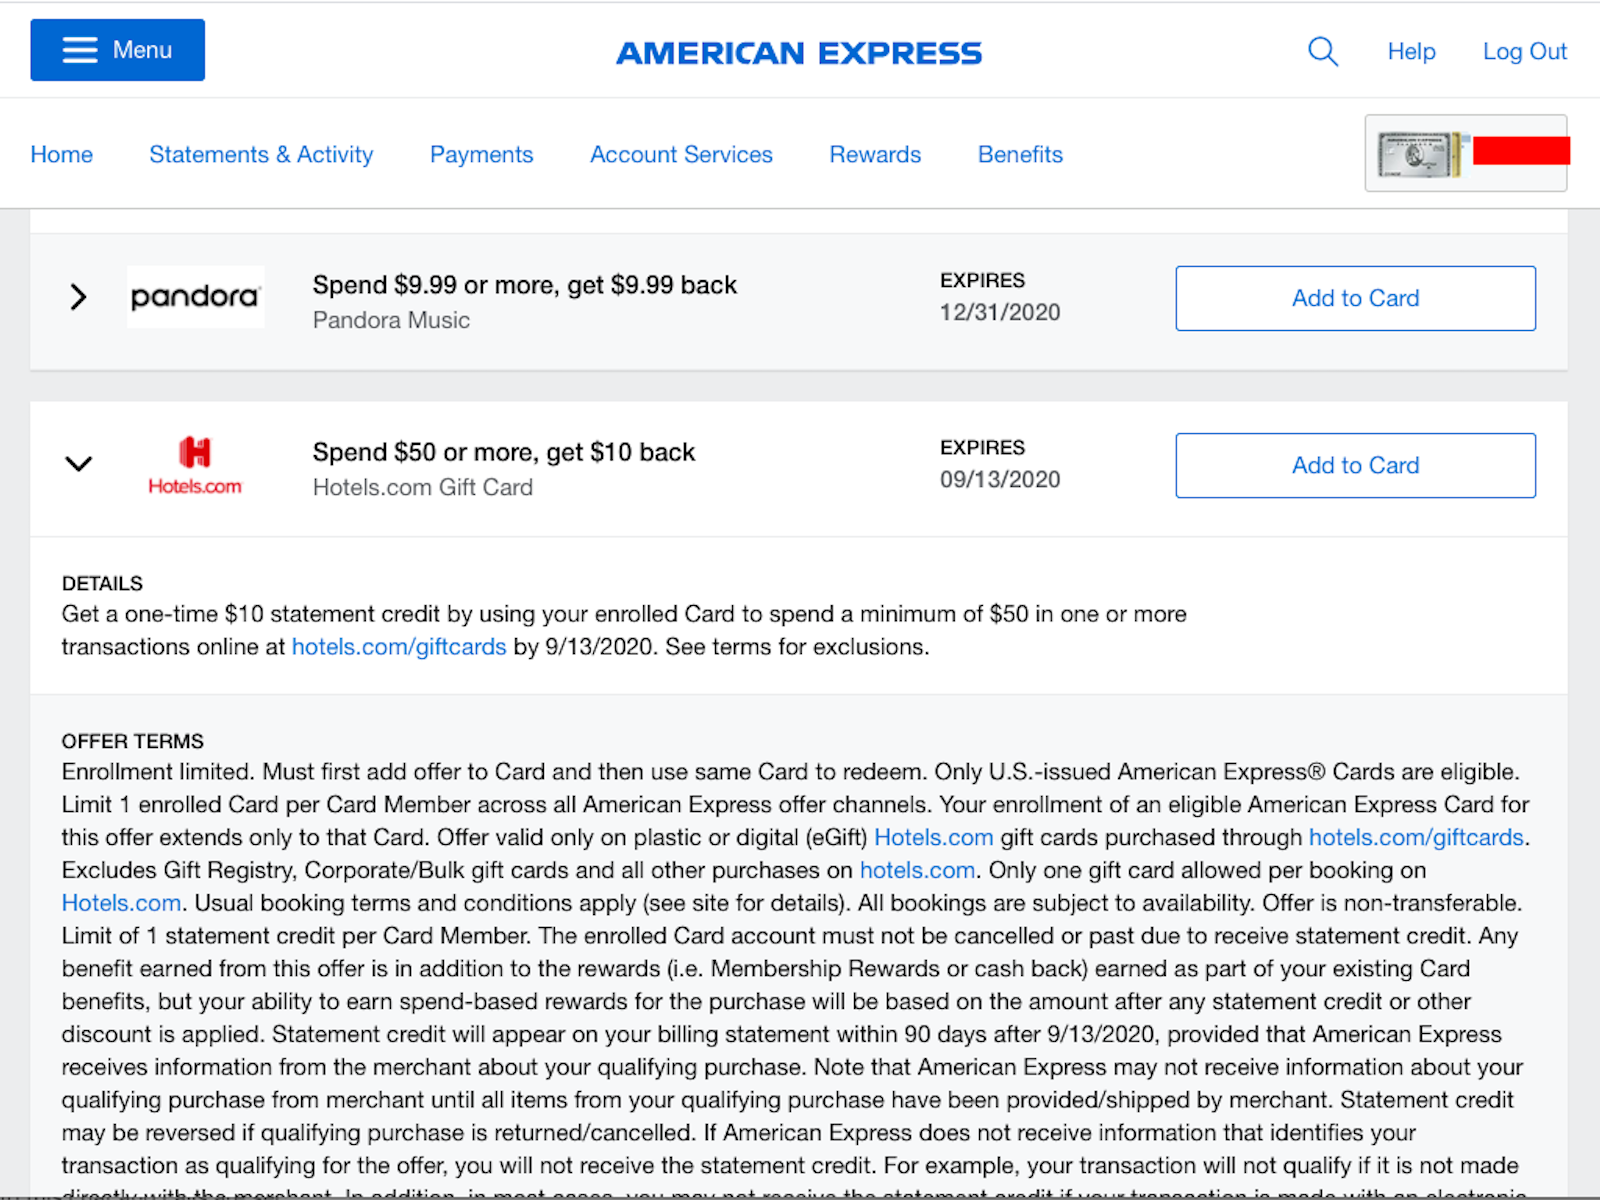 Use Amex Offers for discounts on Hotels.com gift cards, pay with those